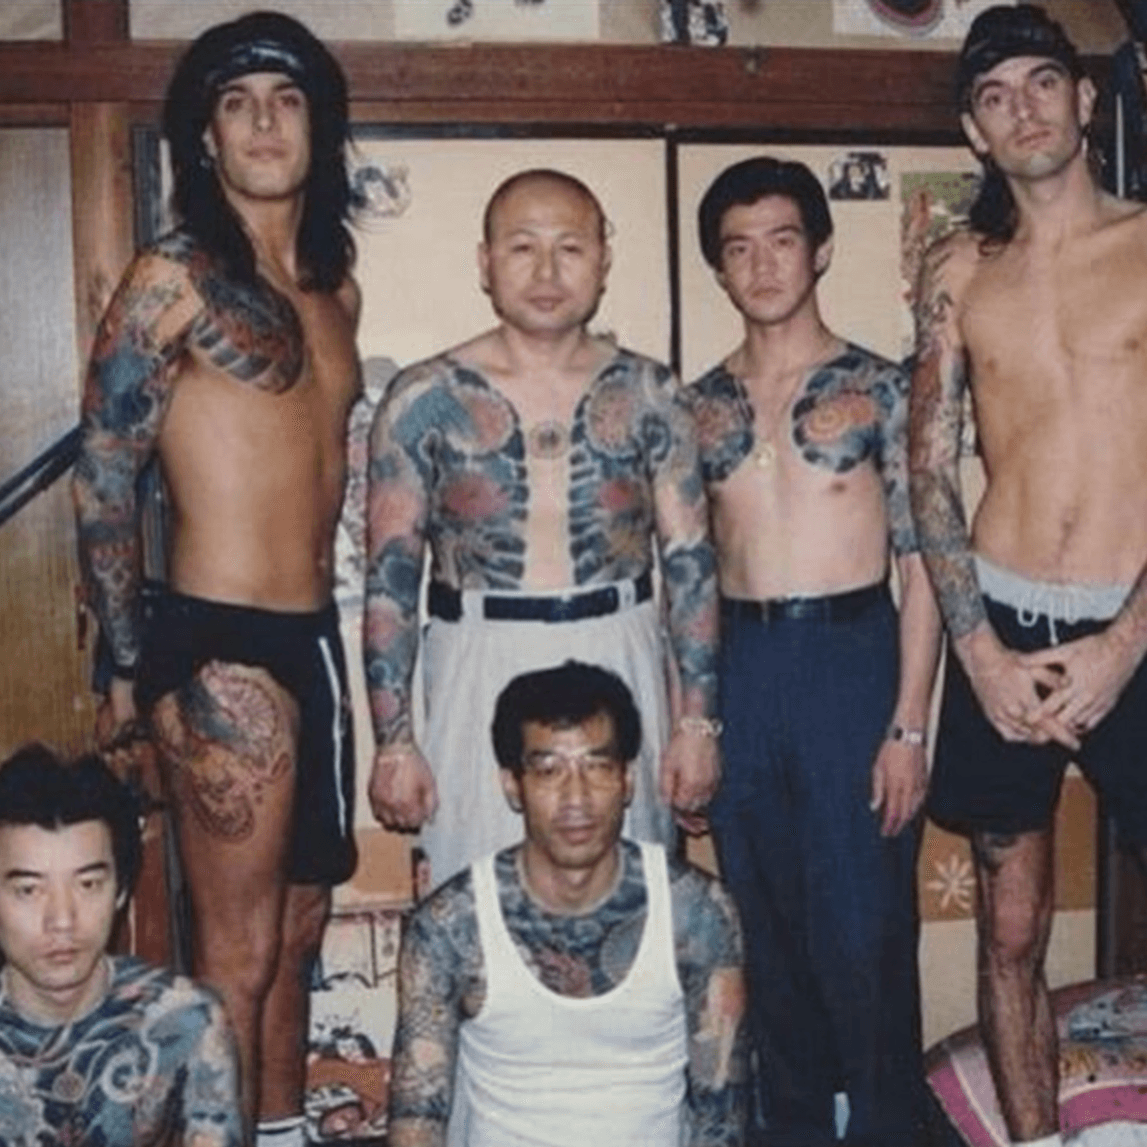 20 Rock  Metal Musicians With Tattoos of Bands